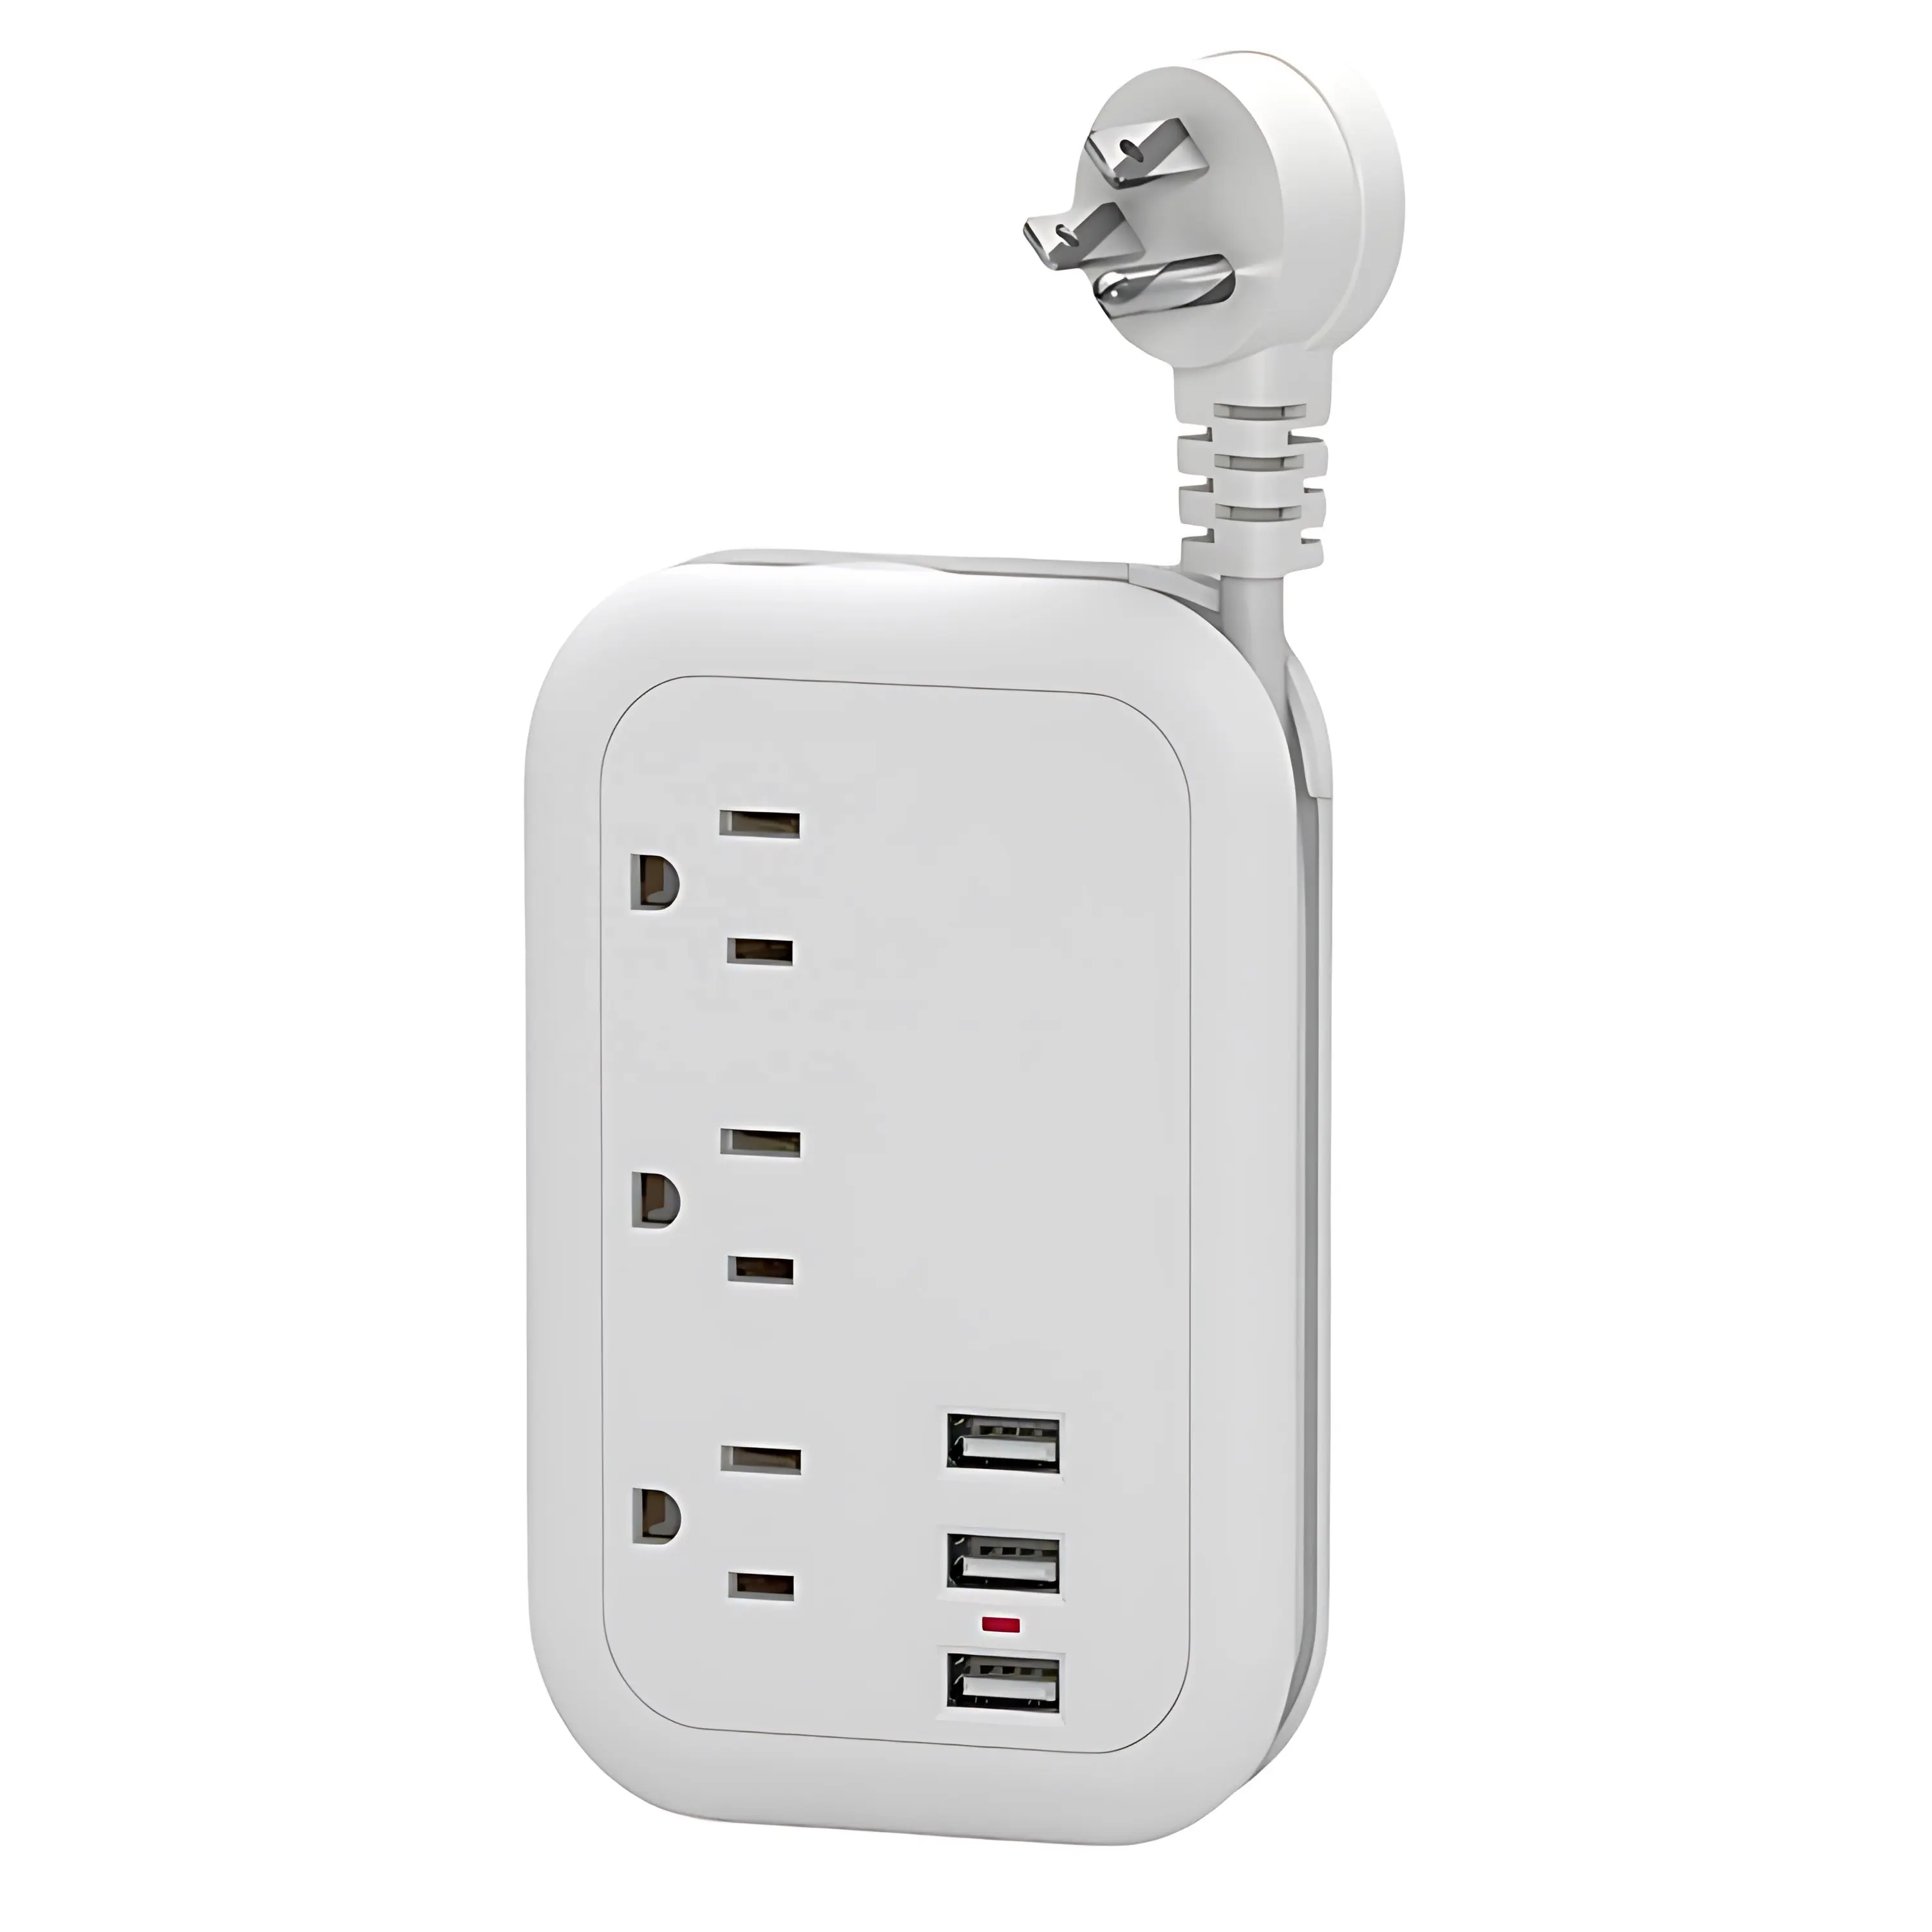 Multi-Functional Travel Socket with US Standard Three-Prong Outlets and USB Ports, Compliant with European Standards for Office